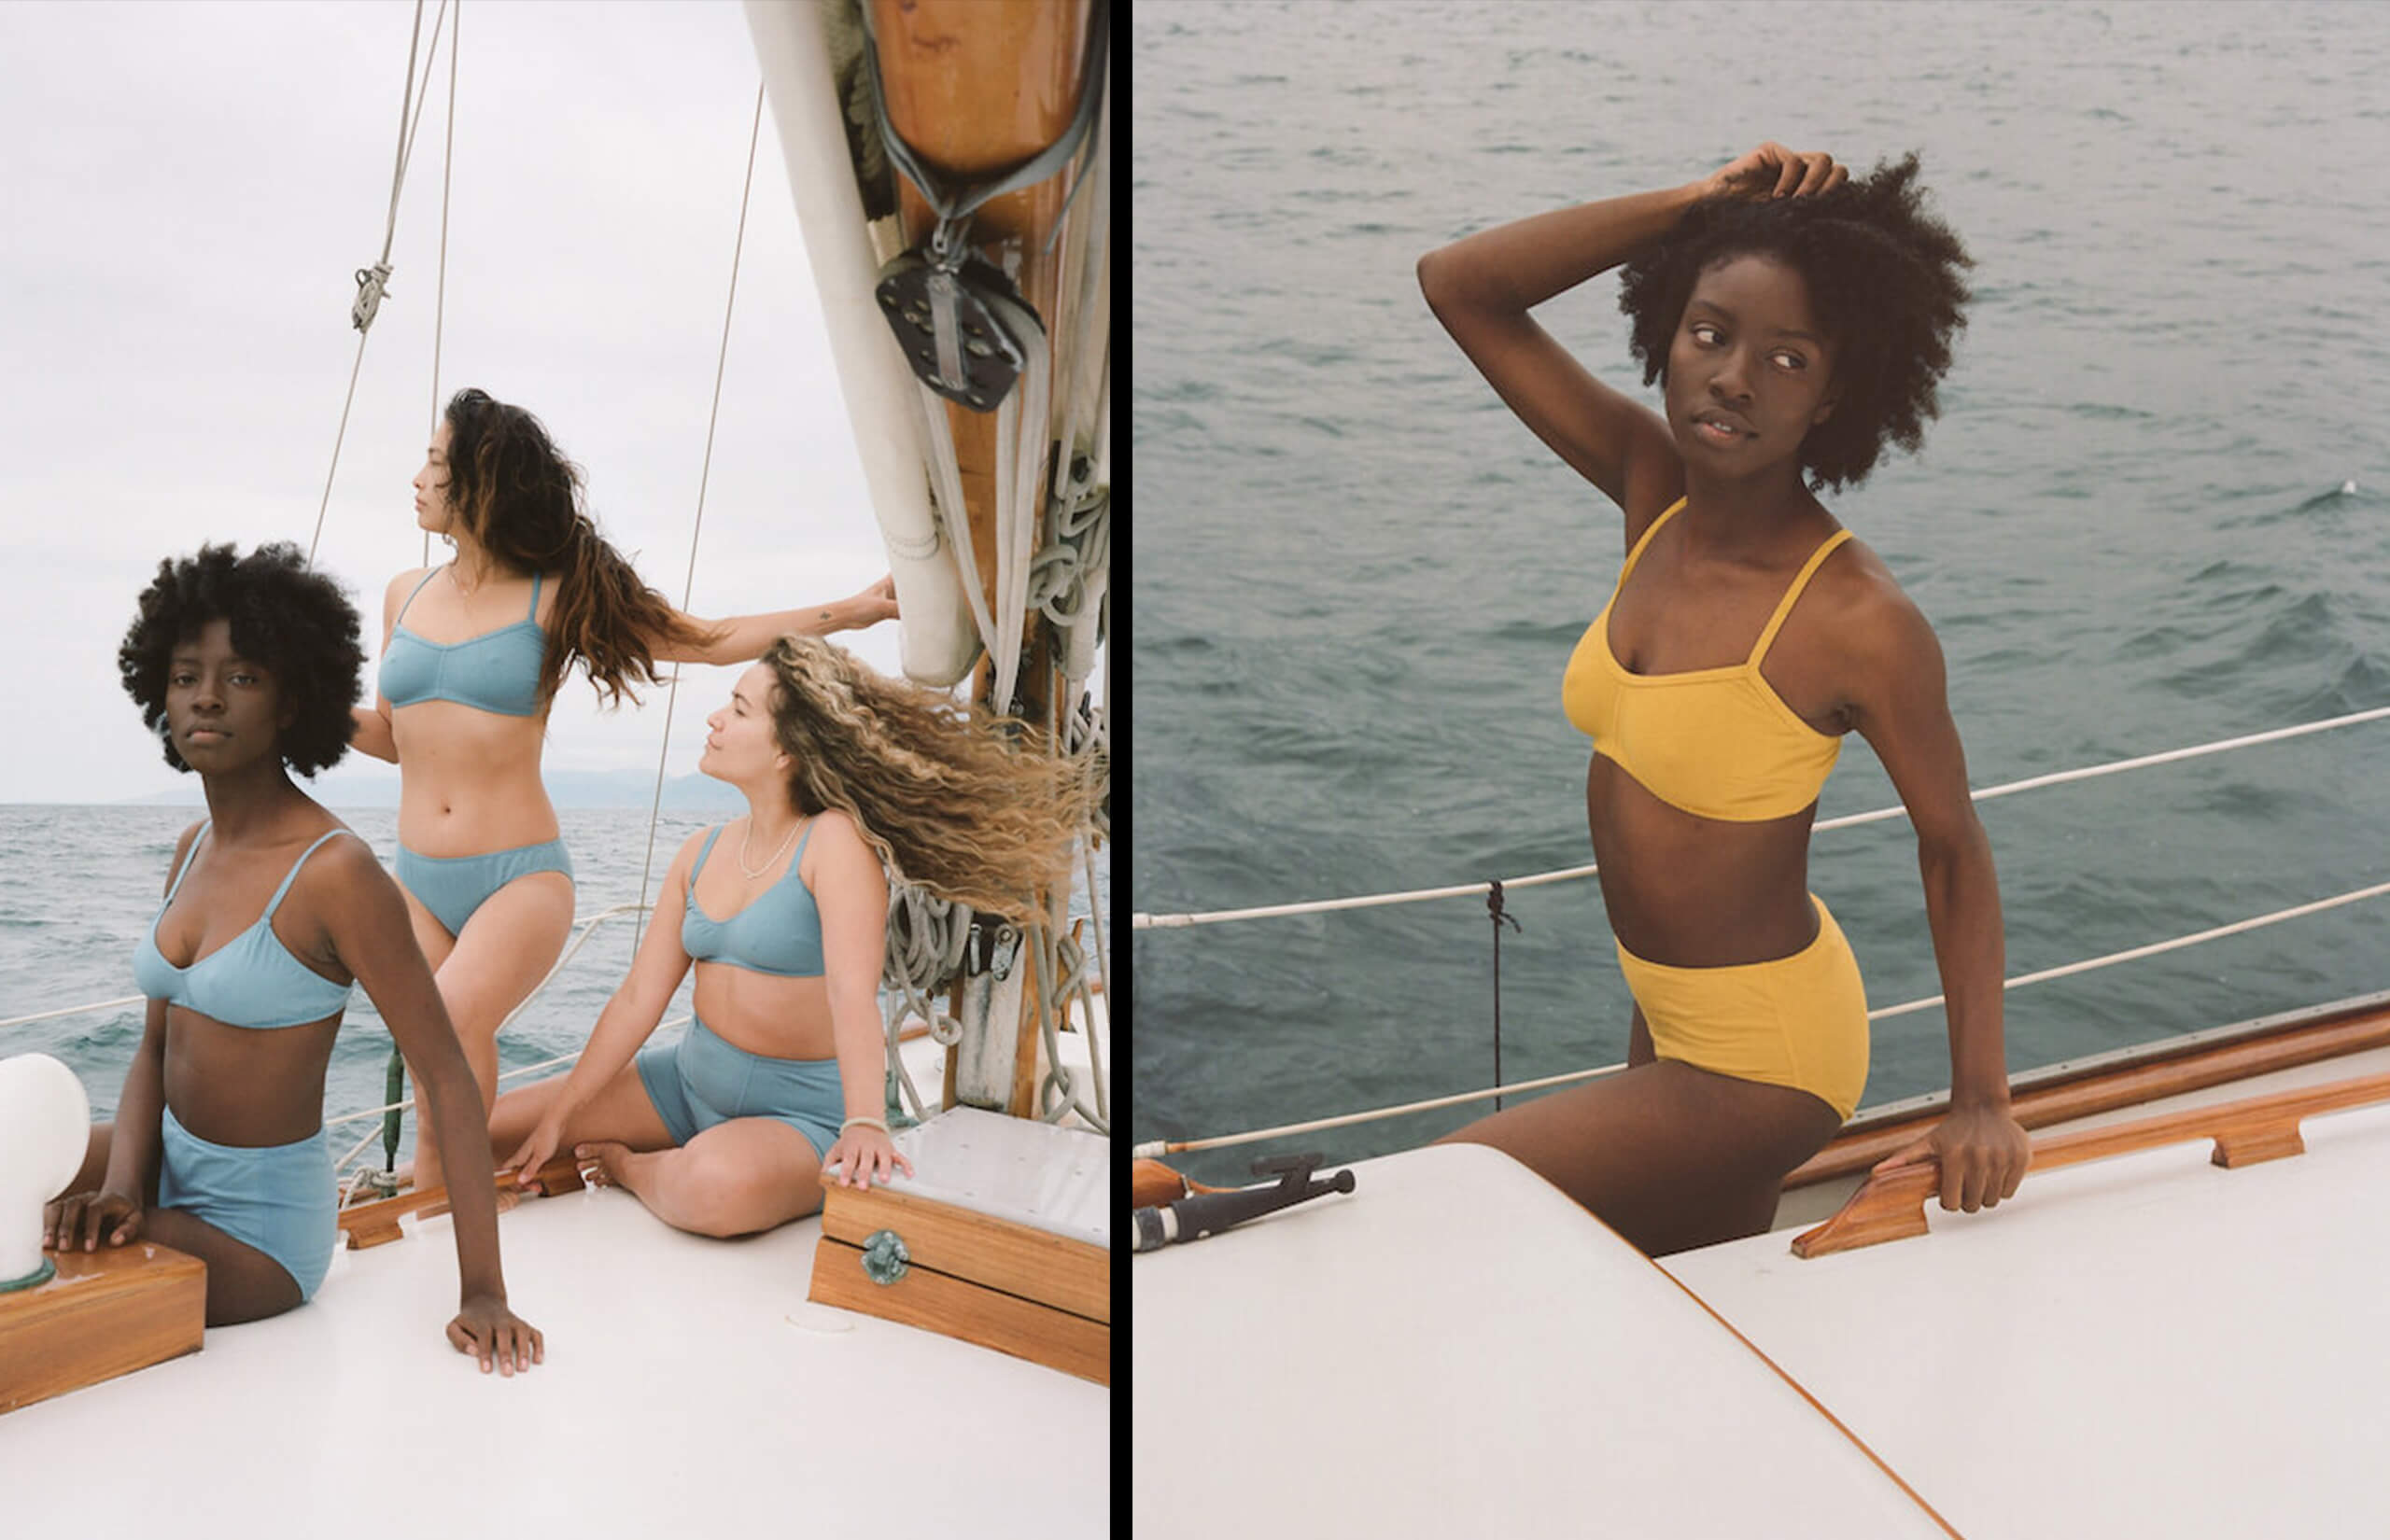 Pansy – The women's sustainable underwear company - Responsible Brands